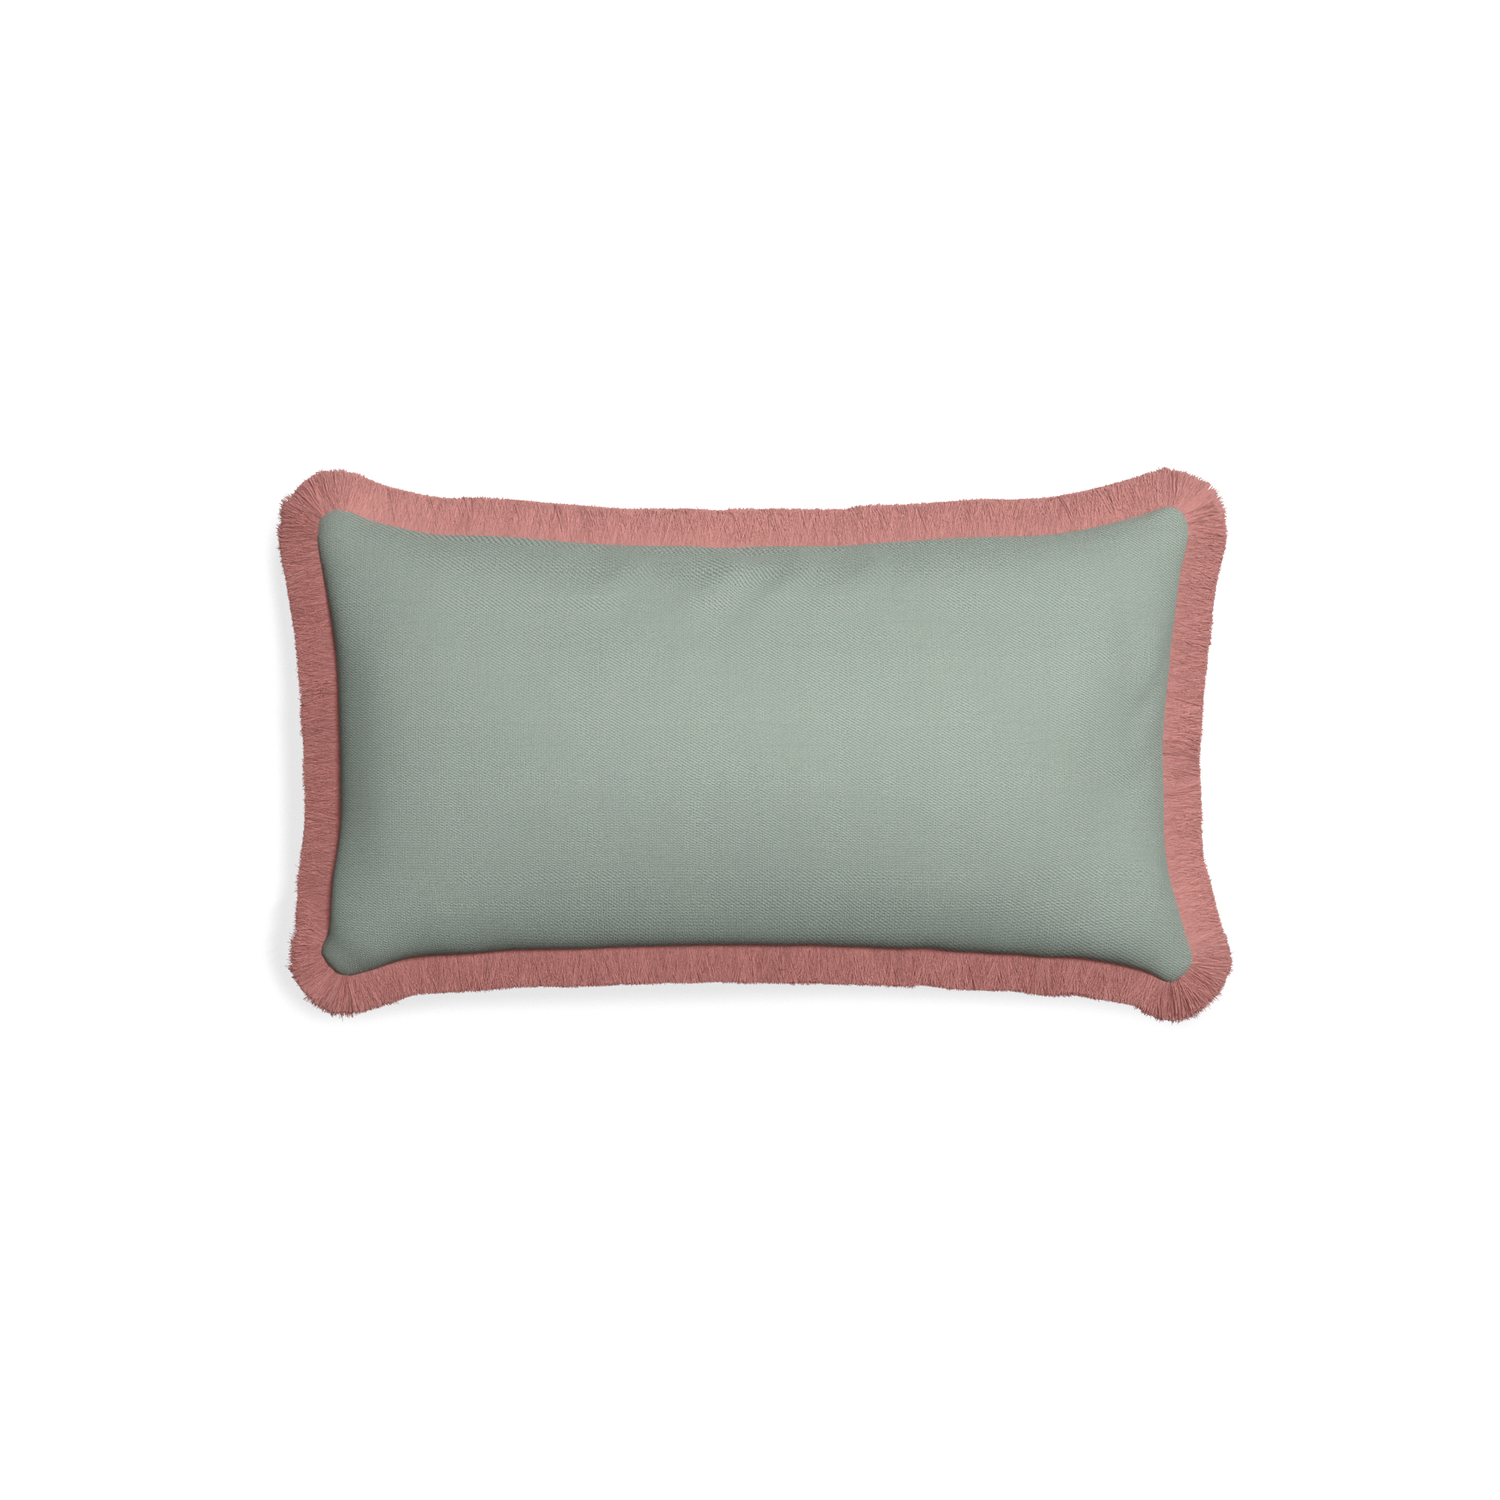 Petite-lumbar sage custom sage green cottonpillow with d fringe on white background